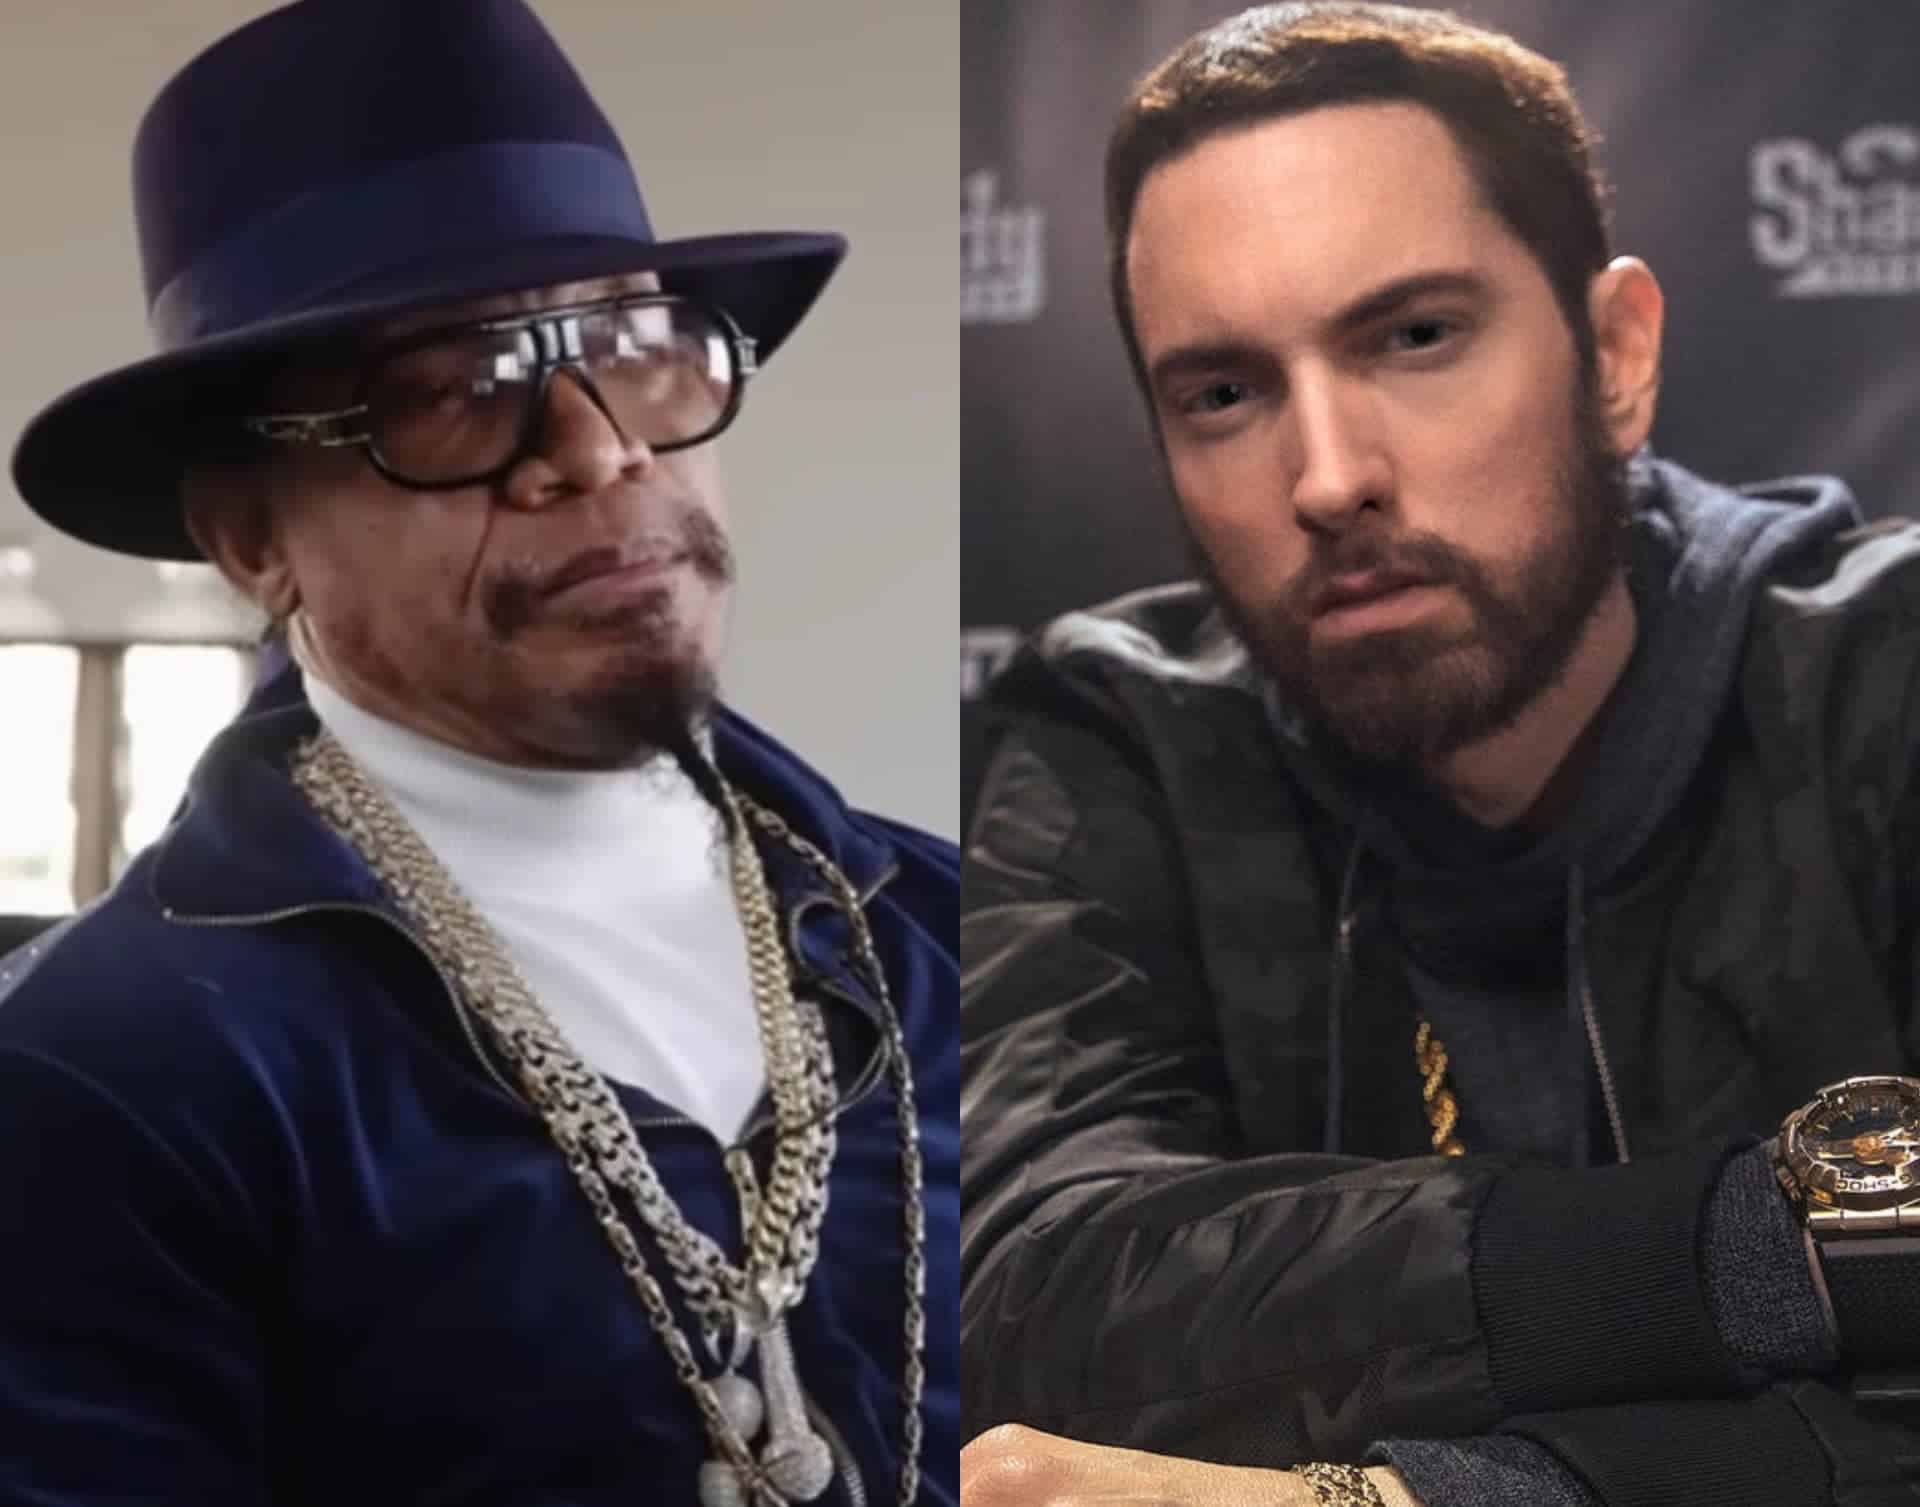 Melle Mel Teases Eminem Diss Track Something Big Is About To Drop